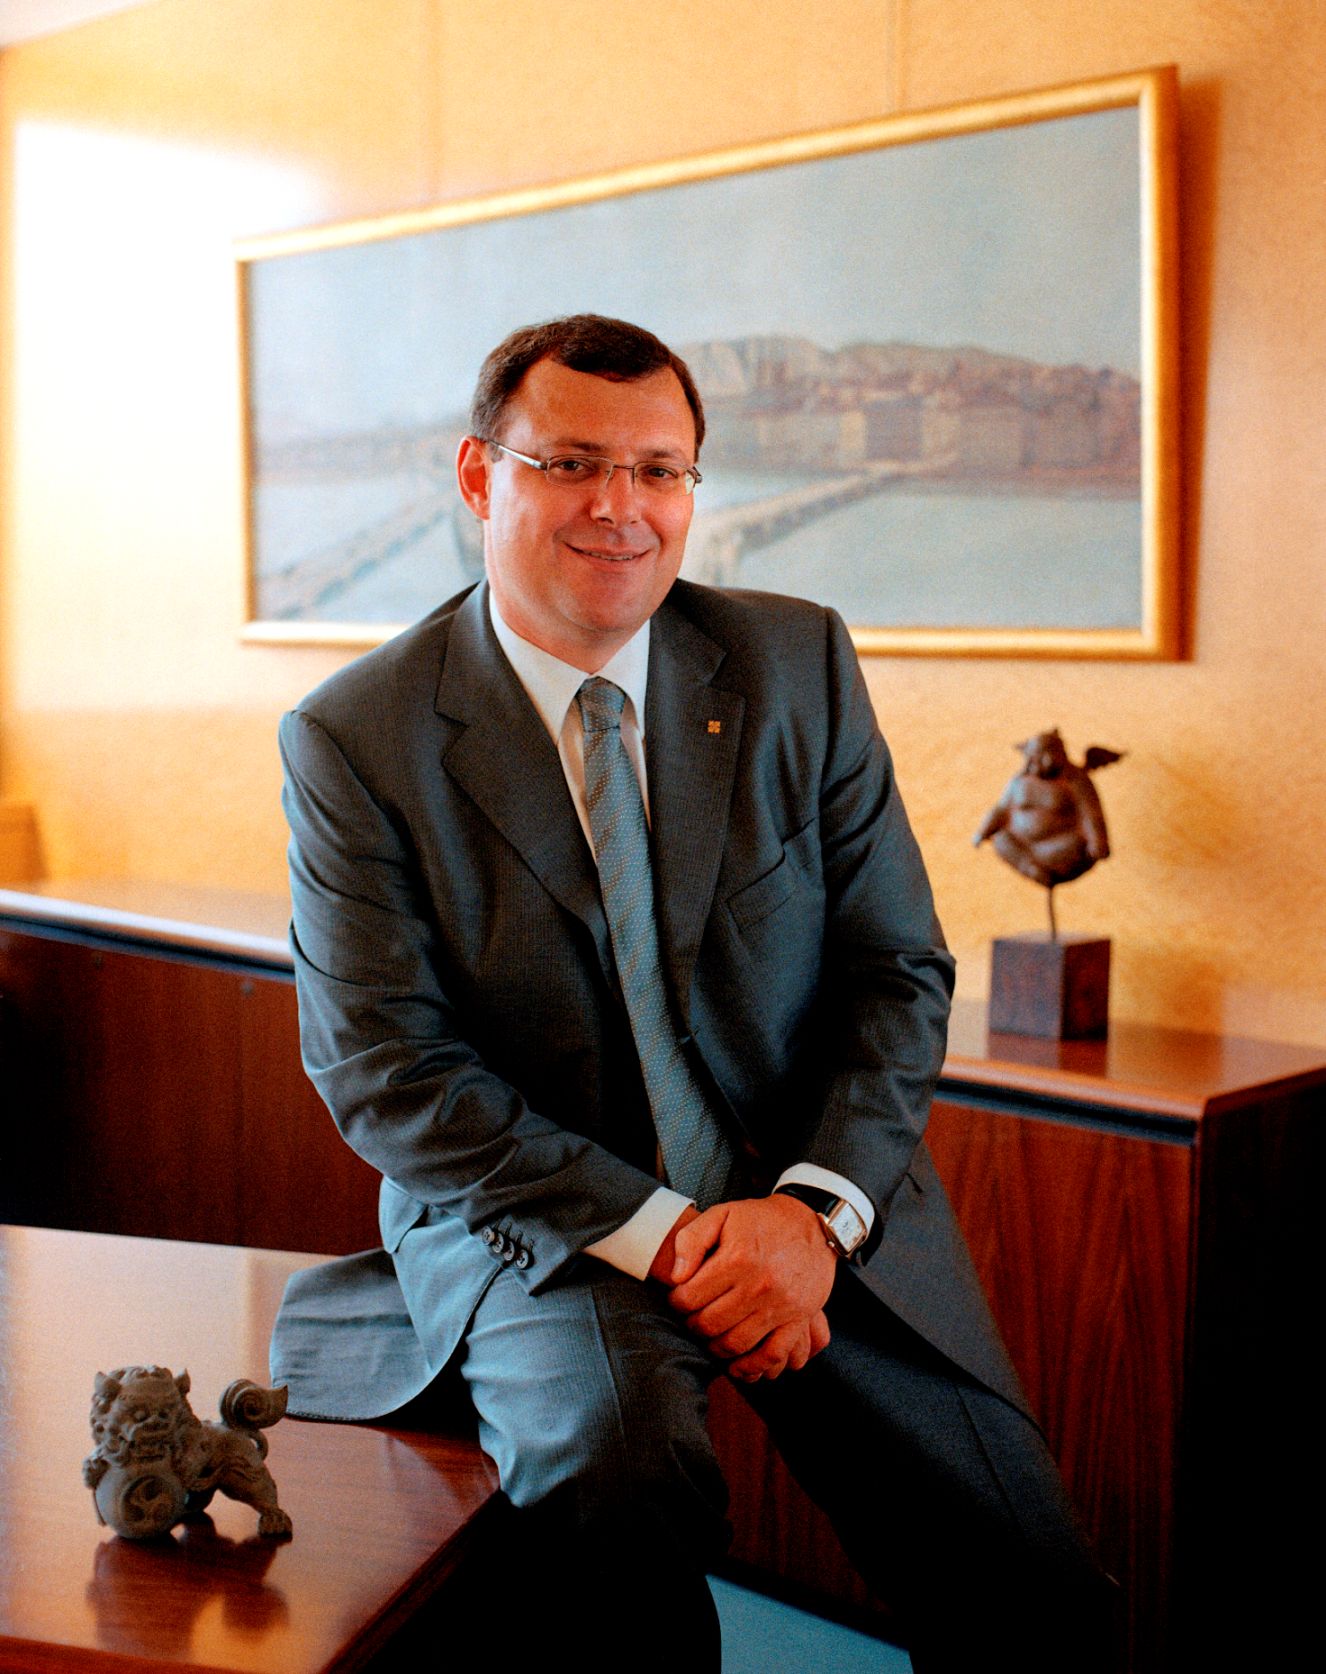 Thierry Stern, Patek Philippe CEO, Talks About Watch Waiting Lists